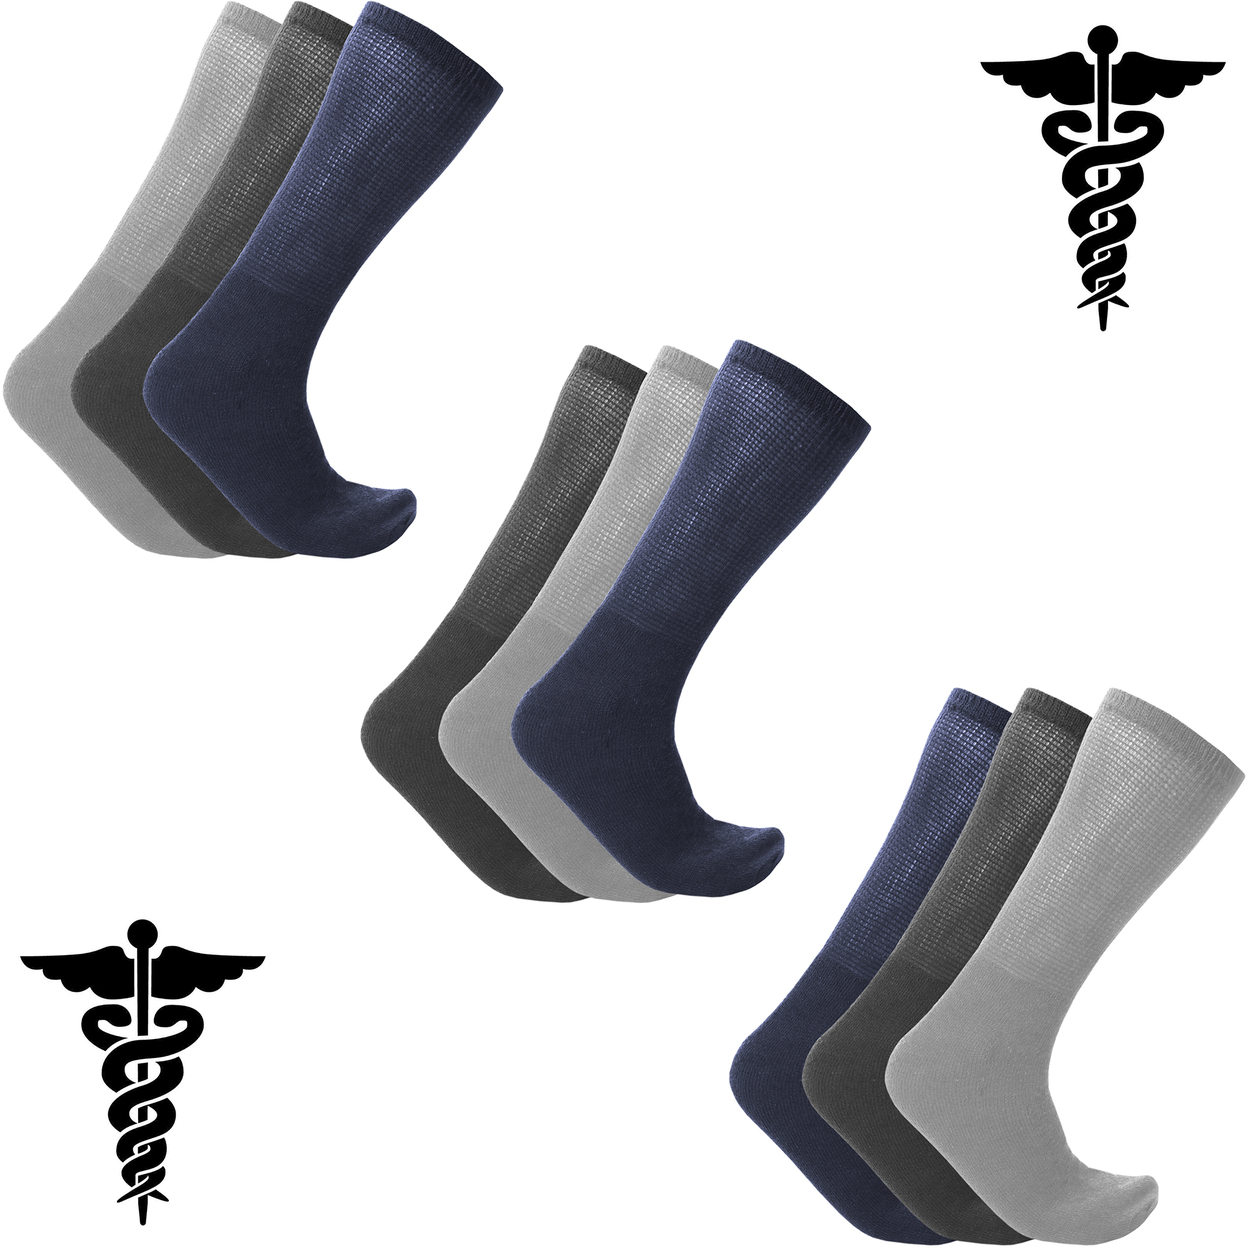 12-Pairs: Physician Approved Non-Binding Neuropathy Diabetic Crew Circulatory Socks - Assorted